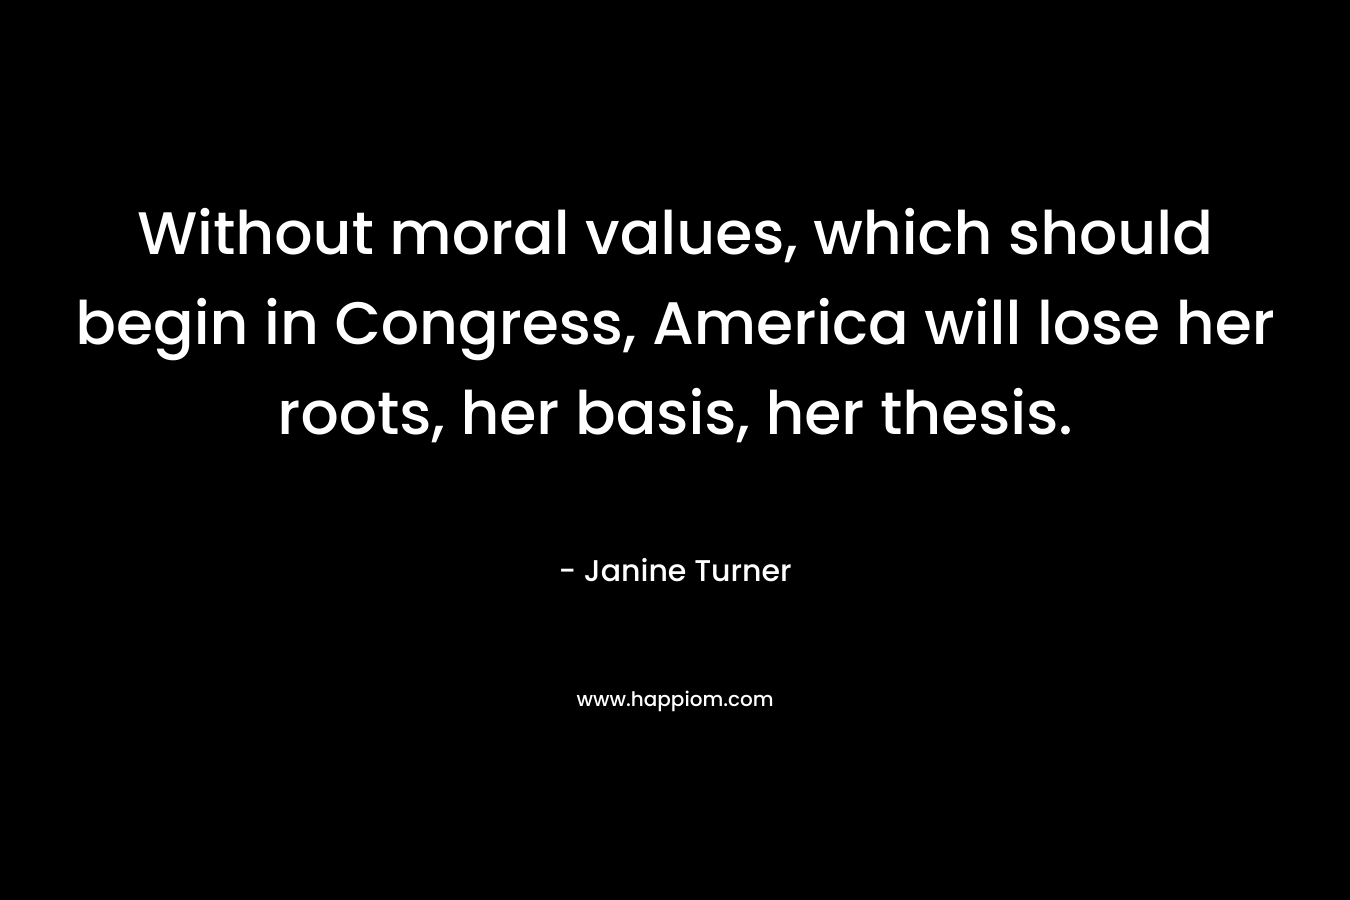 Without moral values, which should begin in Congress, America will lose her roots, her basis, her thesis. – Janine Turner